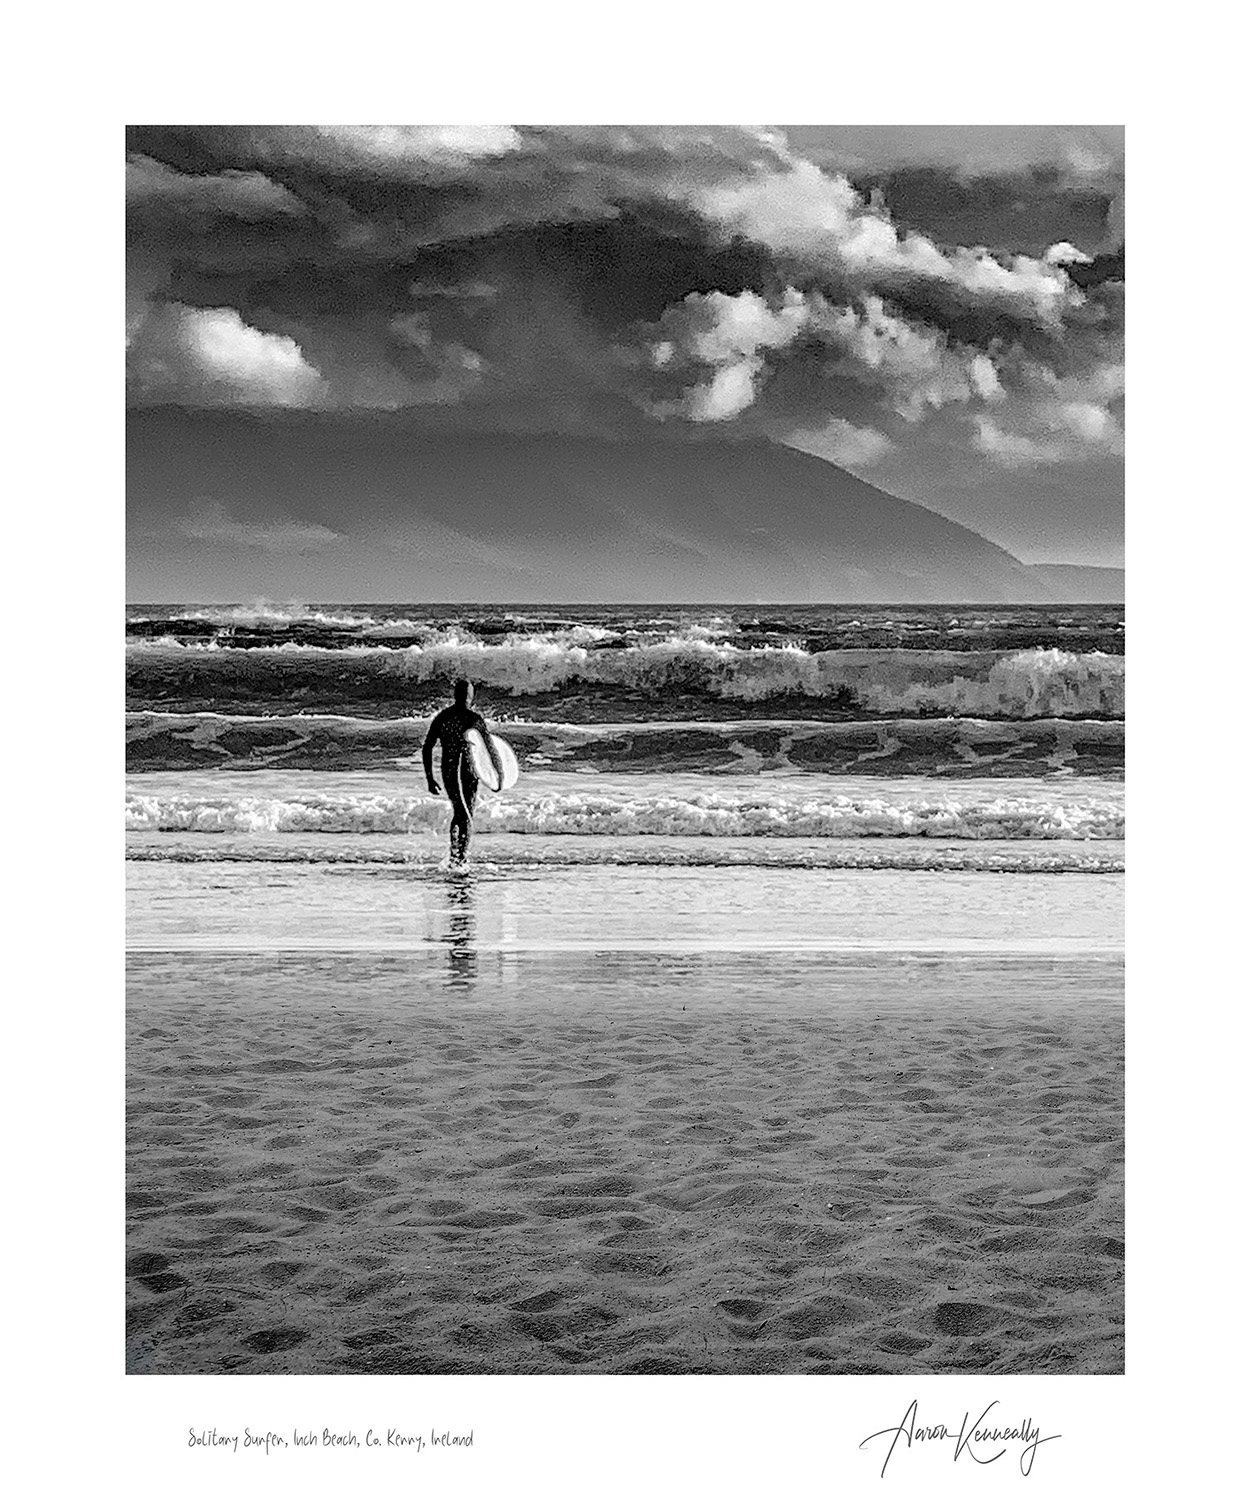 Solitary Surfer, Inch Beach, Co. Kerry, Ireland